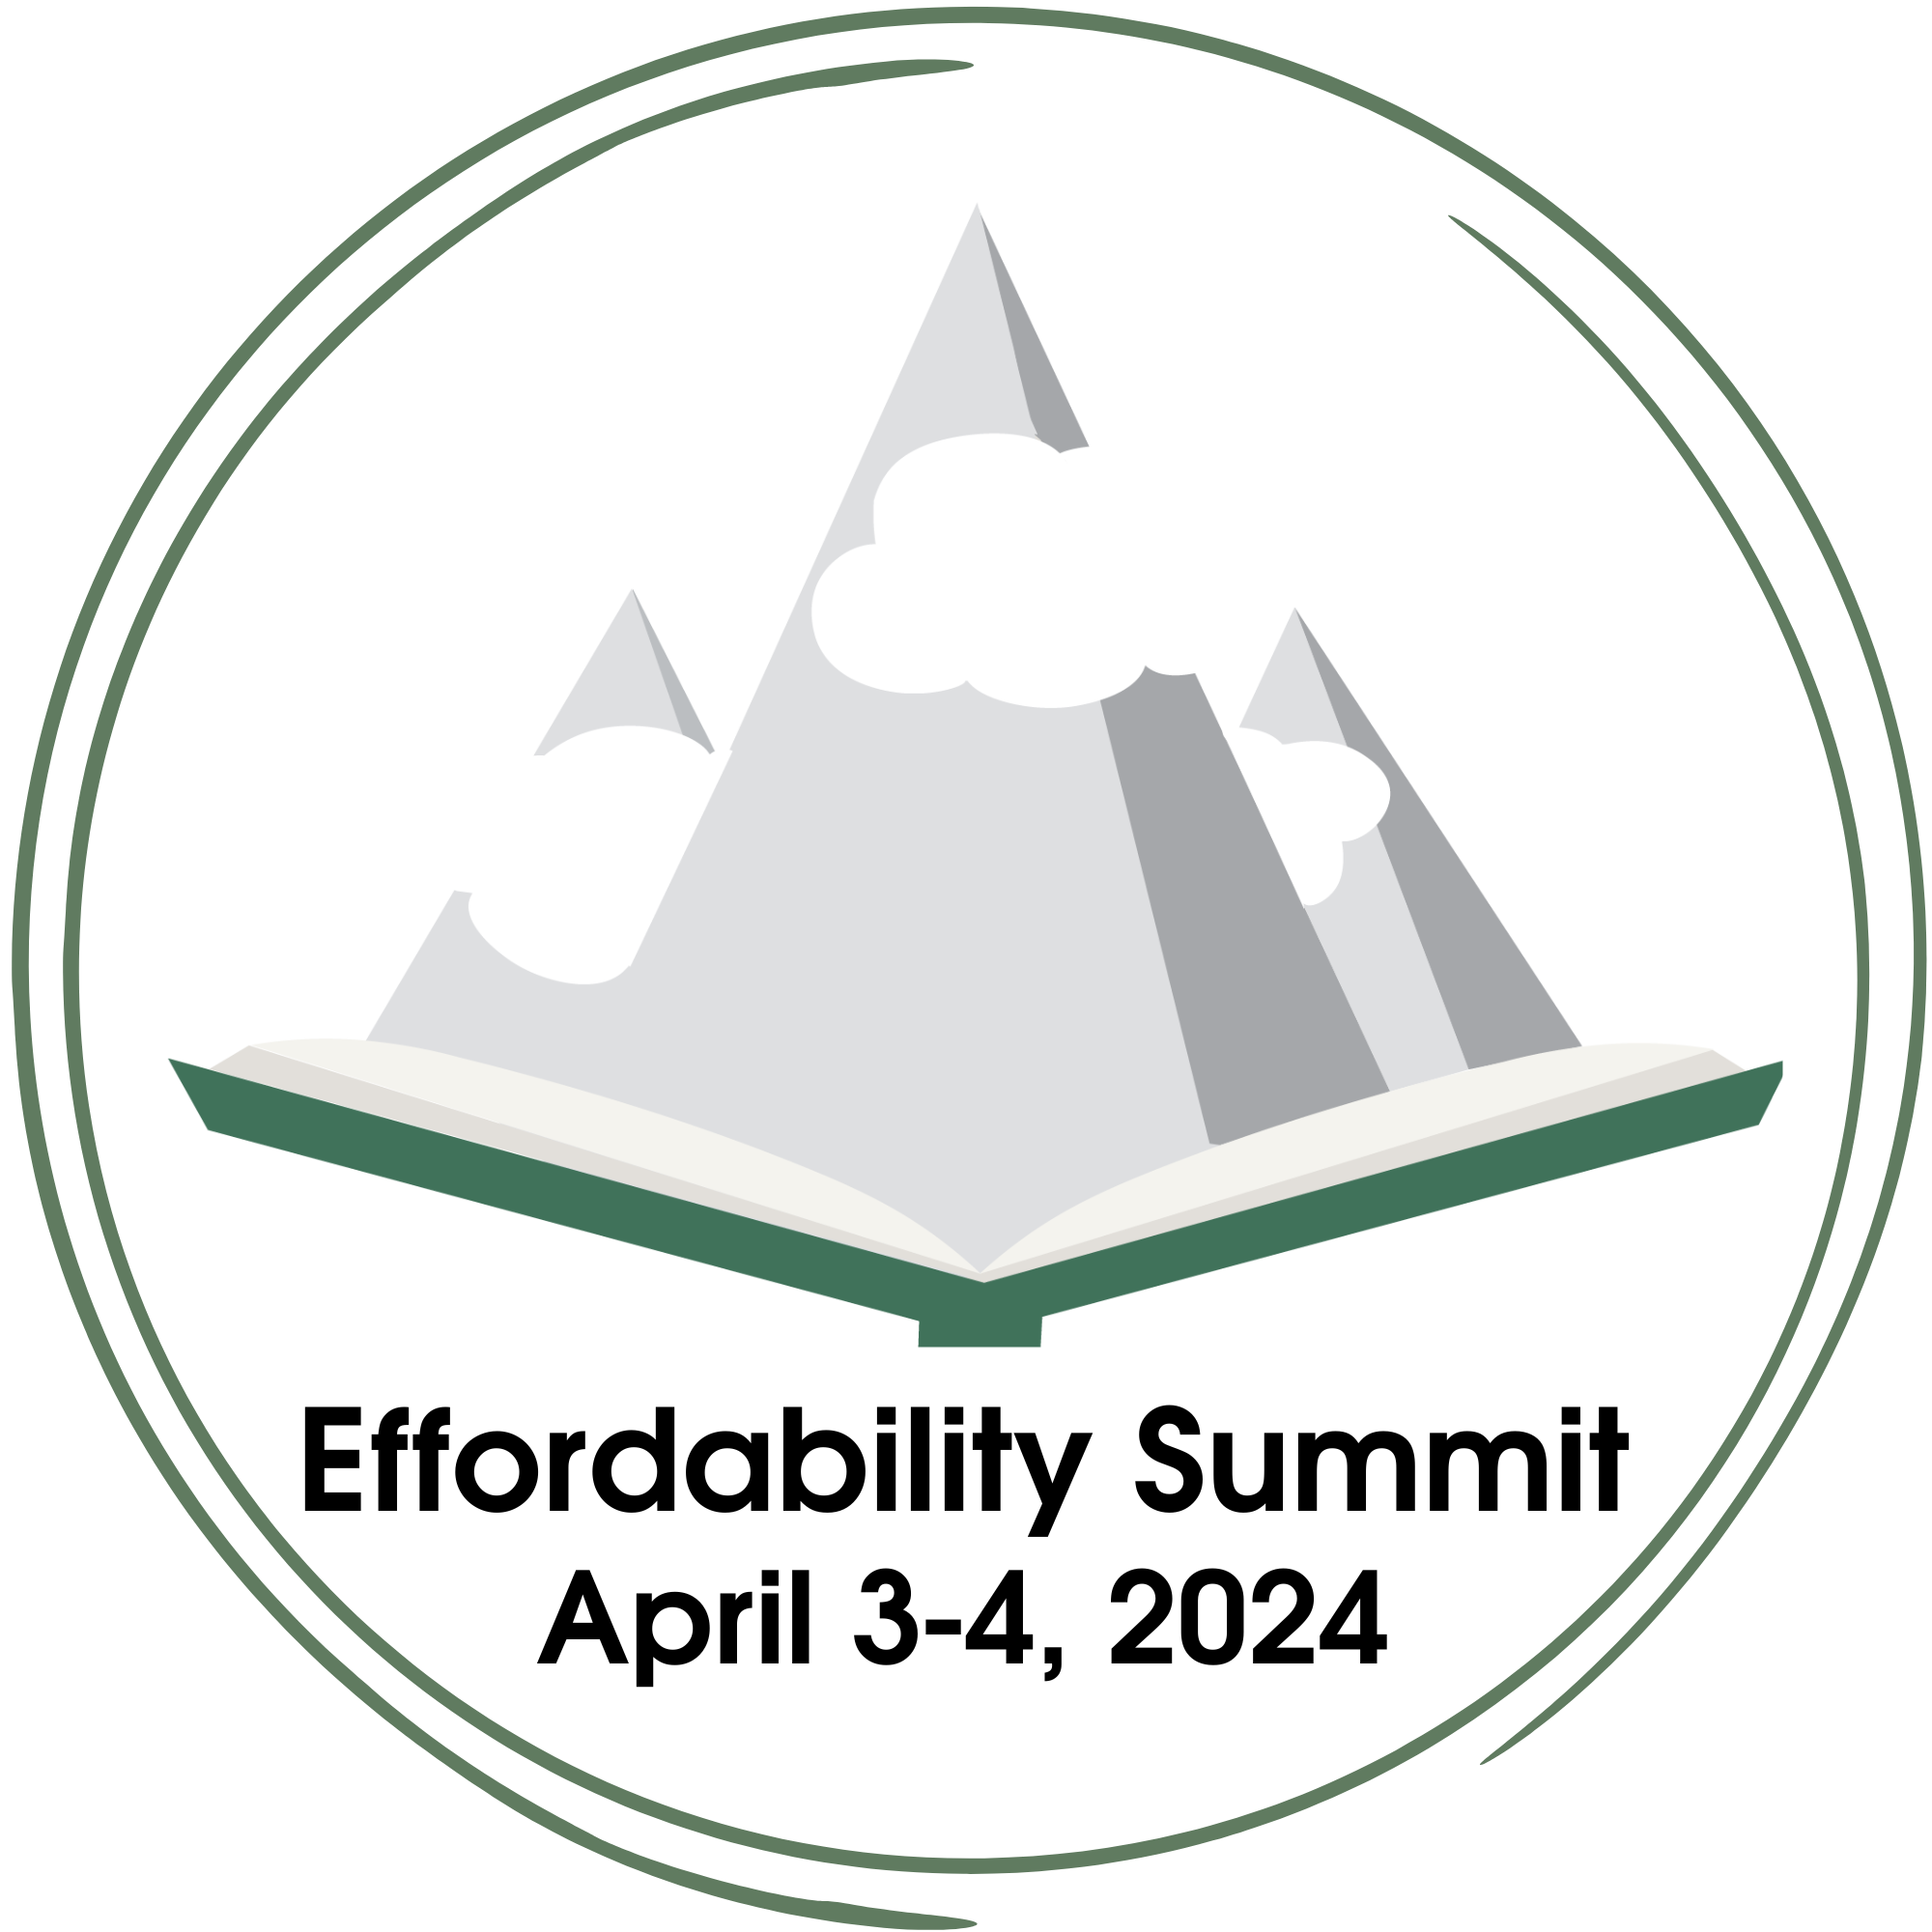 The logo for the Effordability Summit is an open book with mountains rising from it.